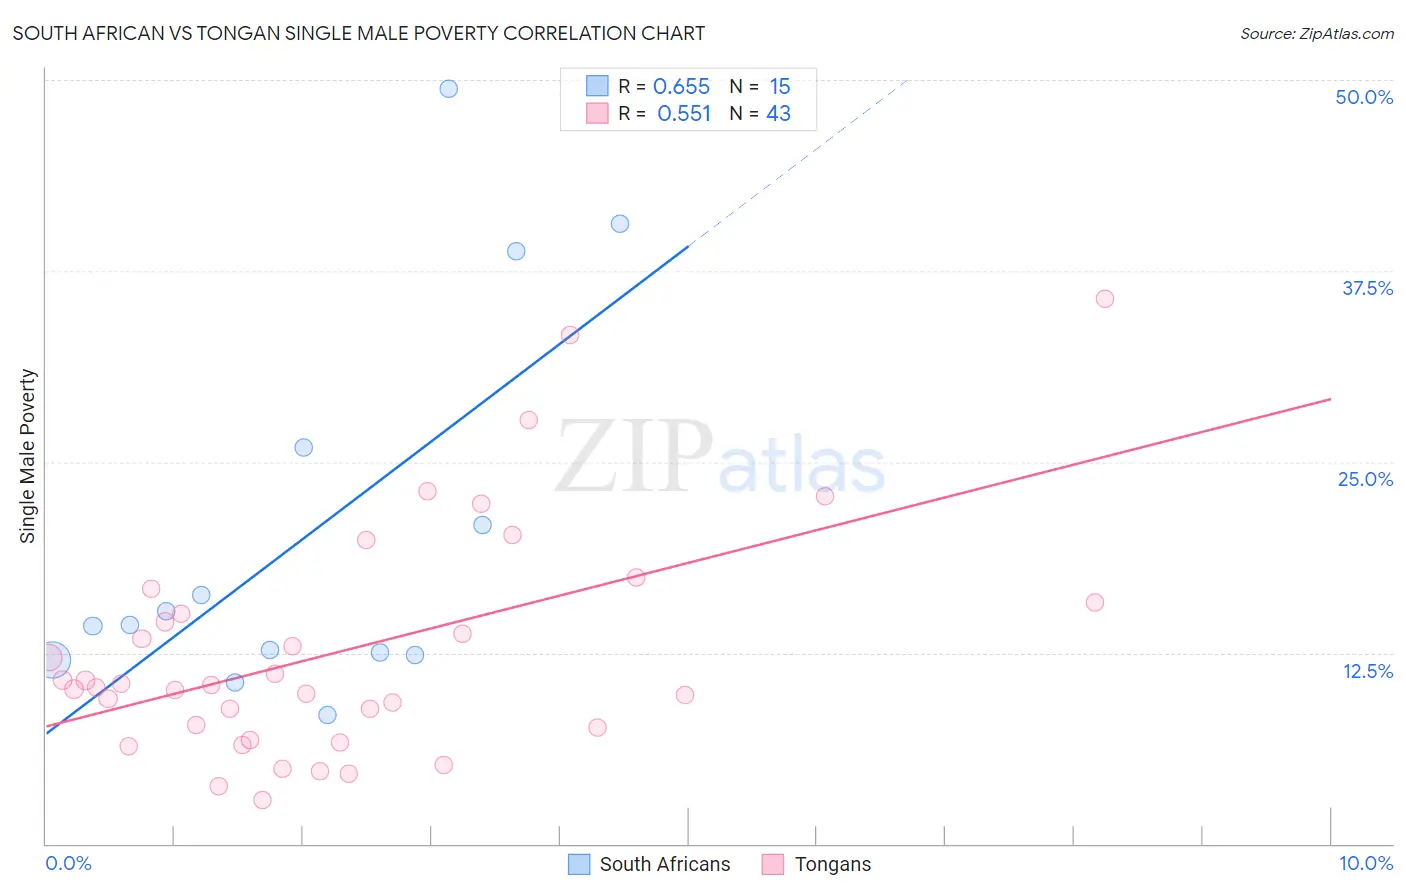 South African vs Tongan Single Male Poverty